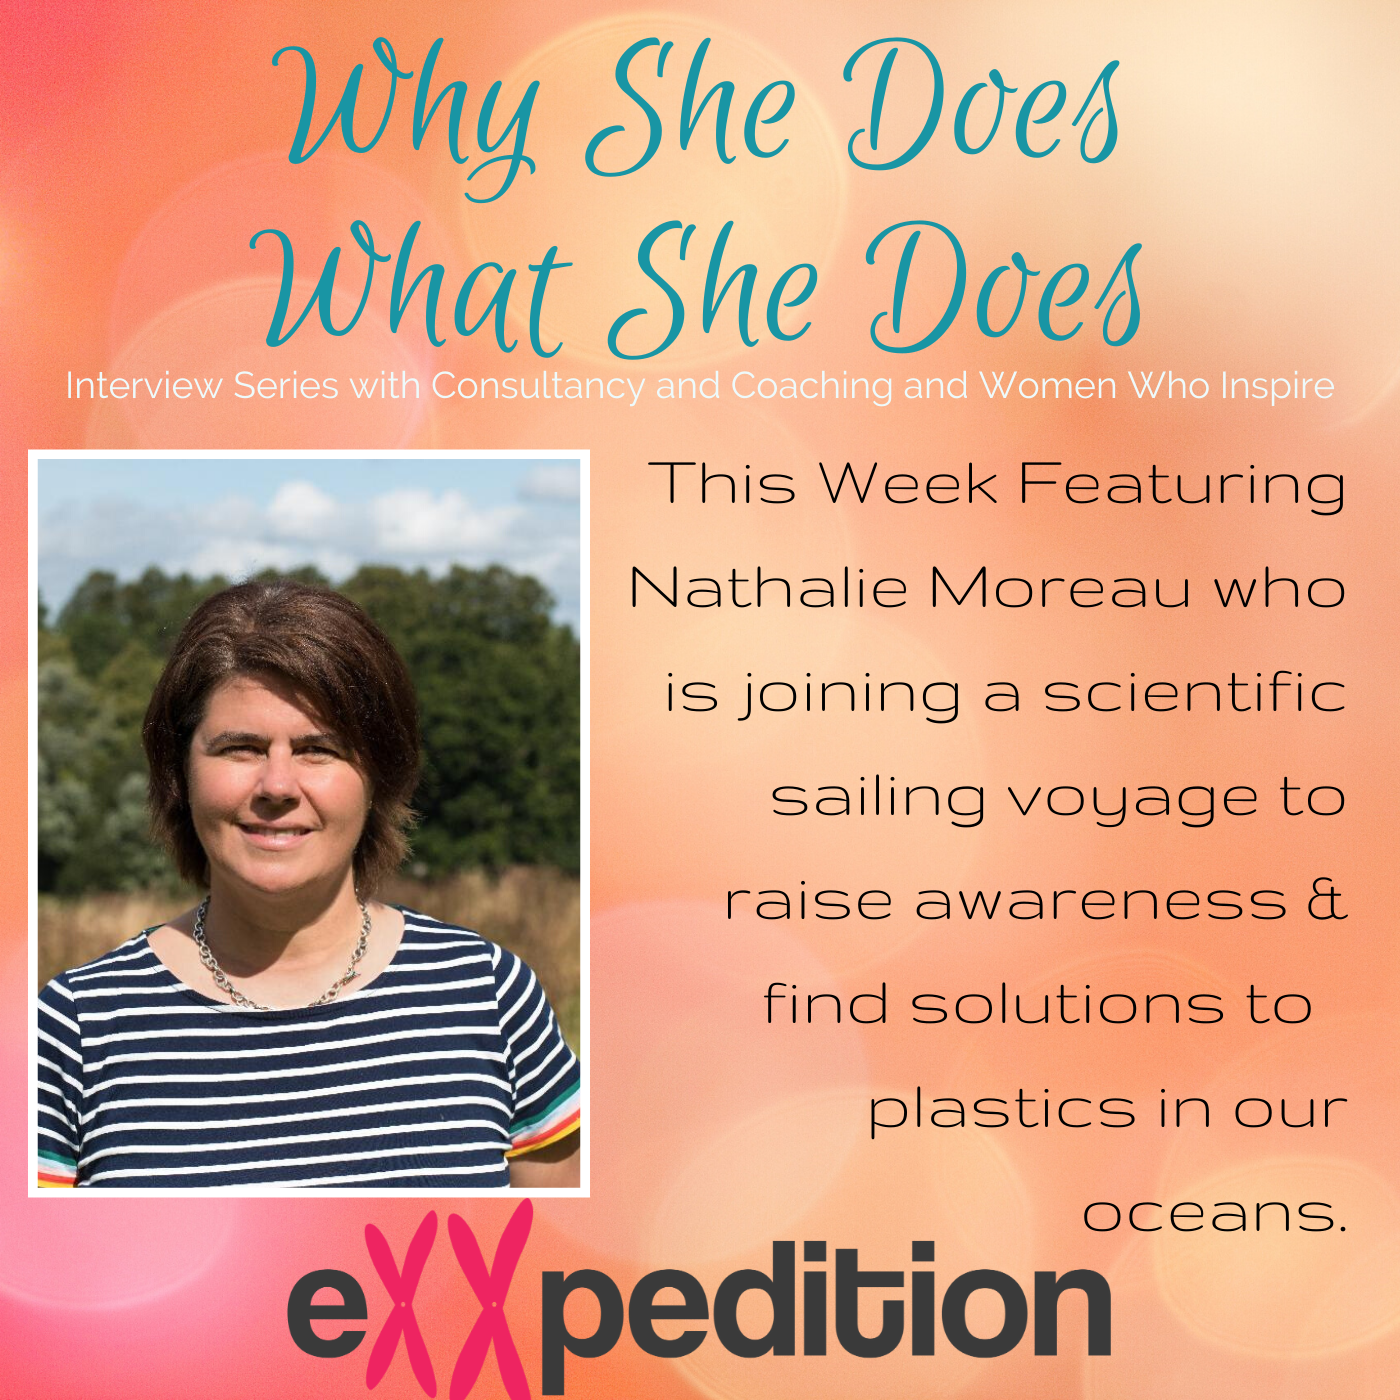 Why She Does What She Does with Nathalie Moreau, Exxpedition, Interview with Carol Evans, Consultancy and Coaching